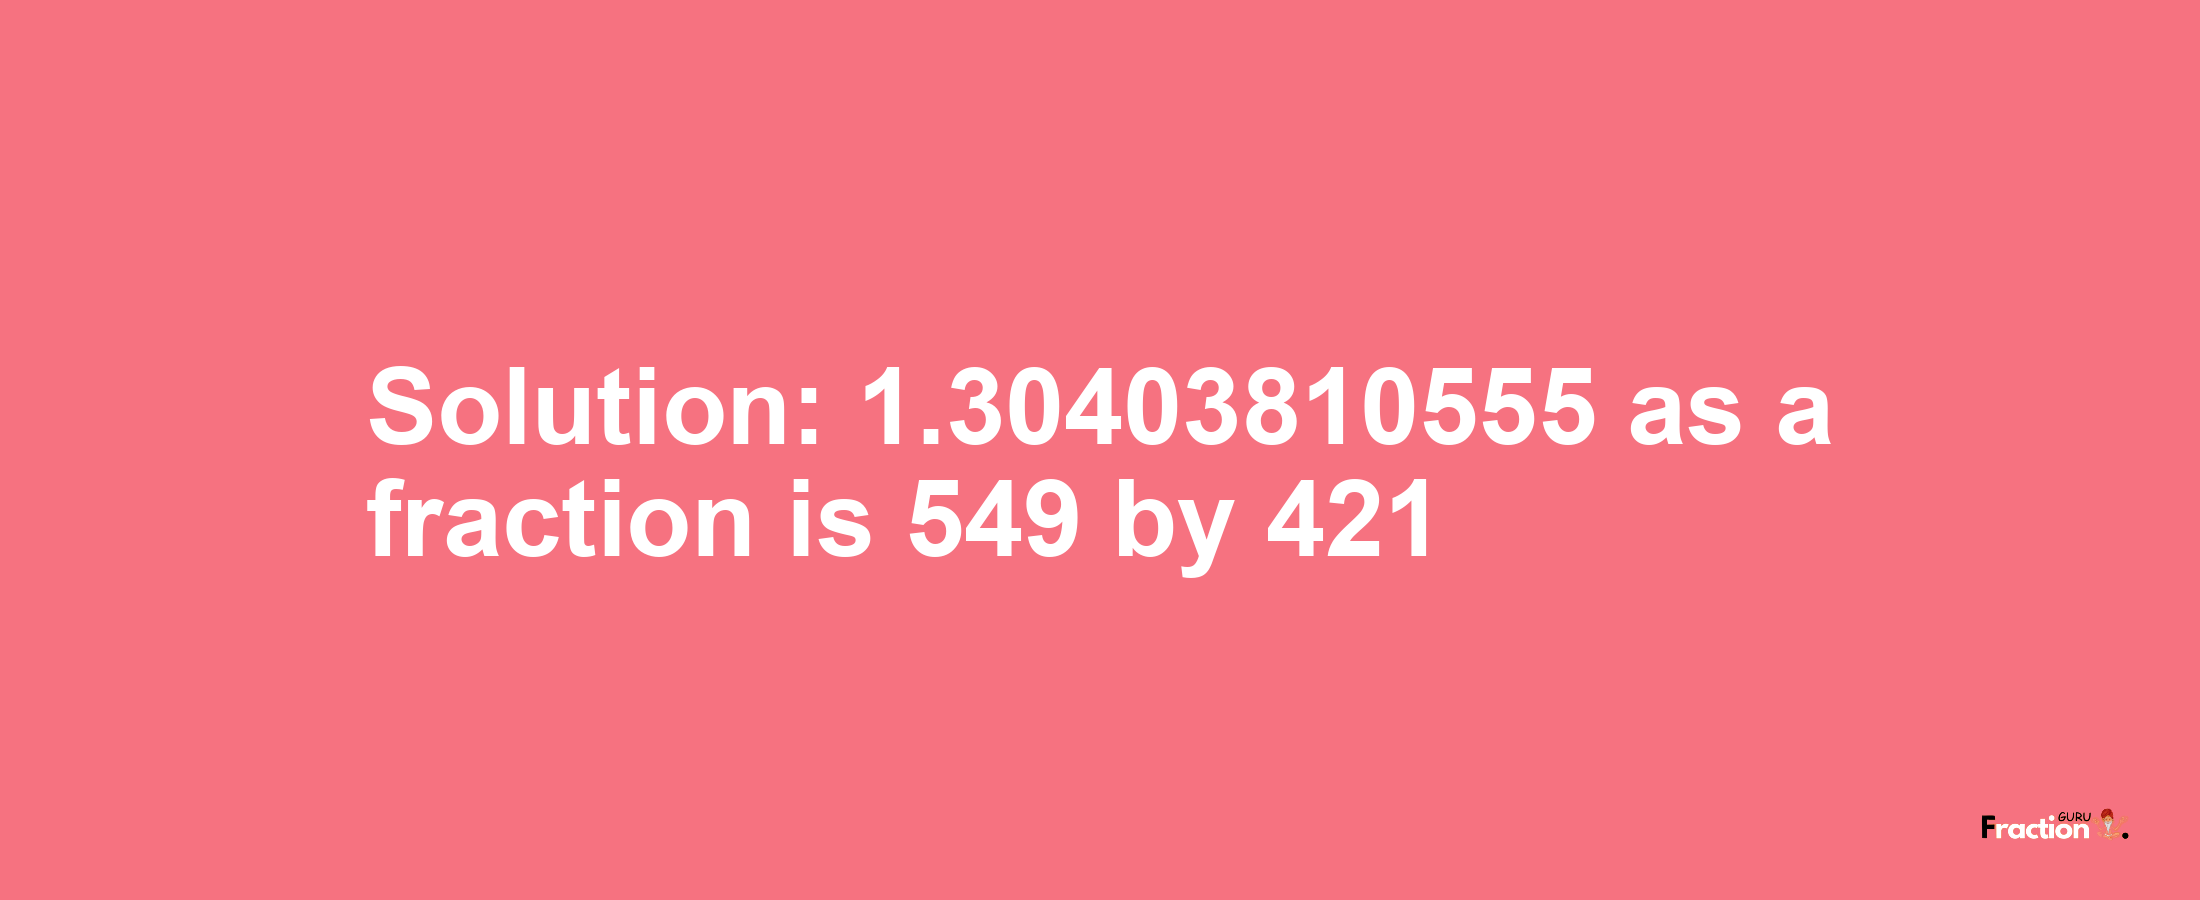 Solution:1.30403810555 as a fraction is 549/421